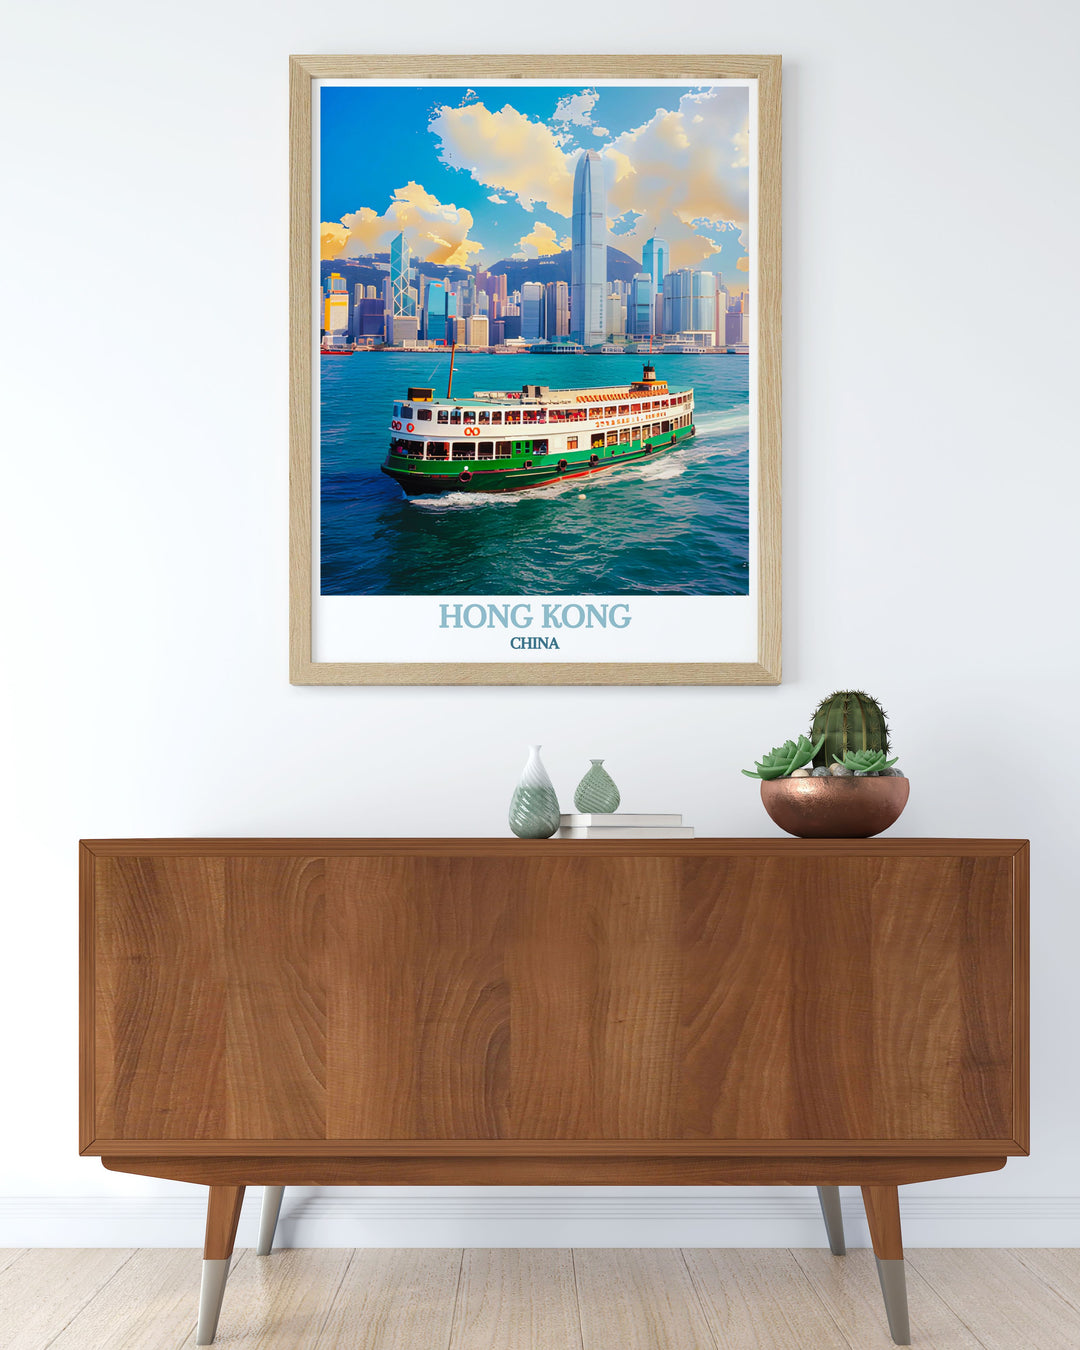 Celebrating the dynamic skyline of Hong Kong, this travel poster features the citys skyscrapers set against the tranquil harbor, bringing the vibrant energy of Hong Kong into your home decor. Perfect for urban enthusiasts and travelers.